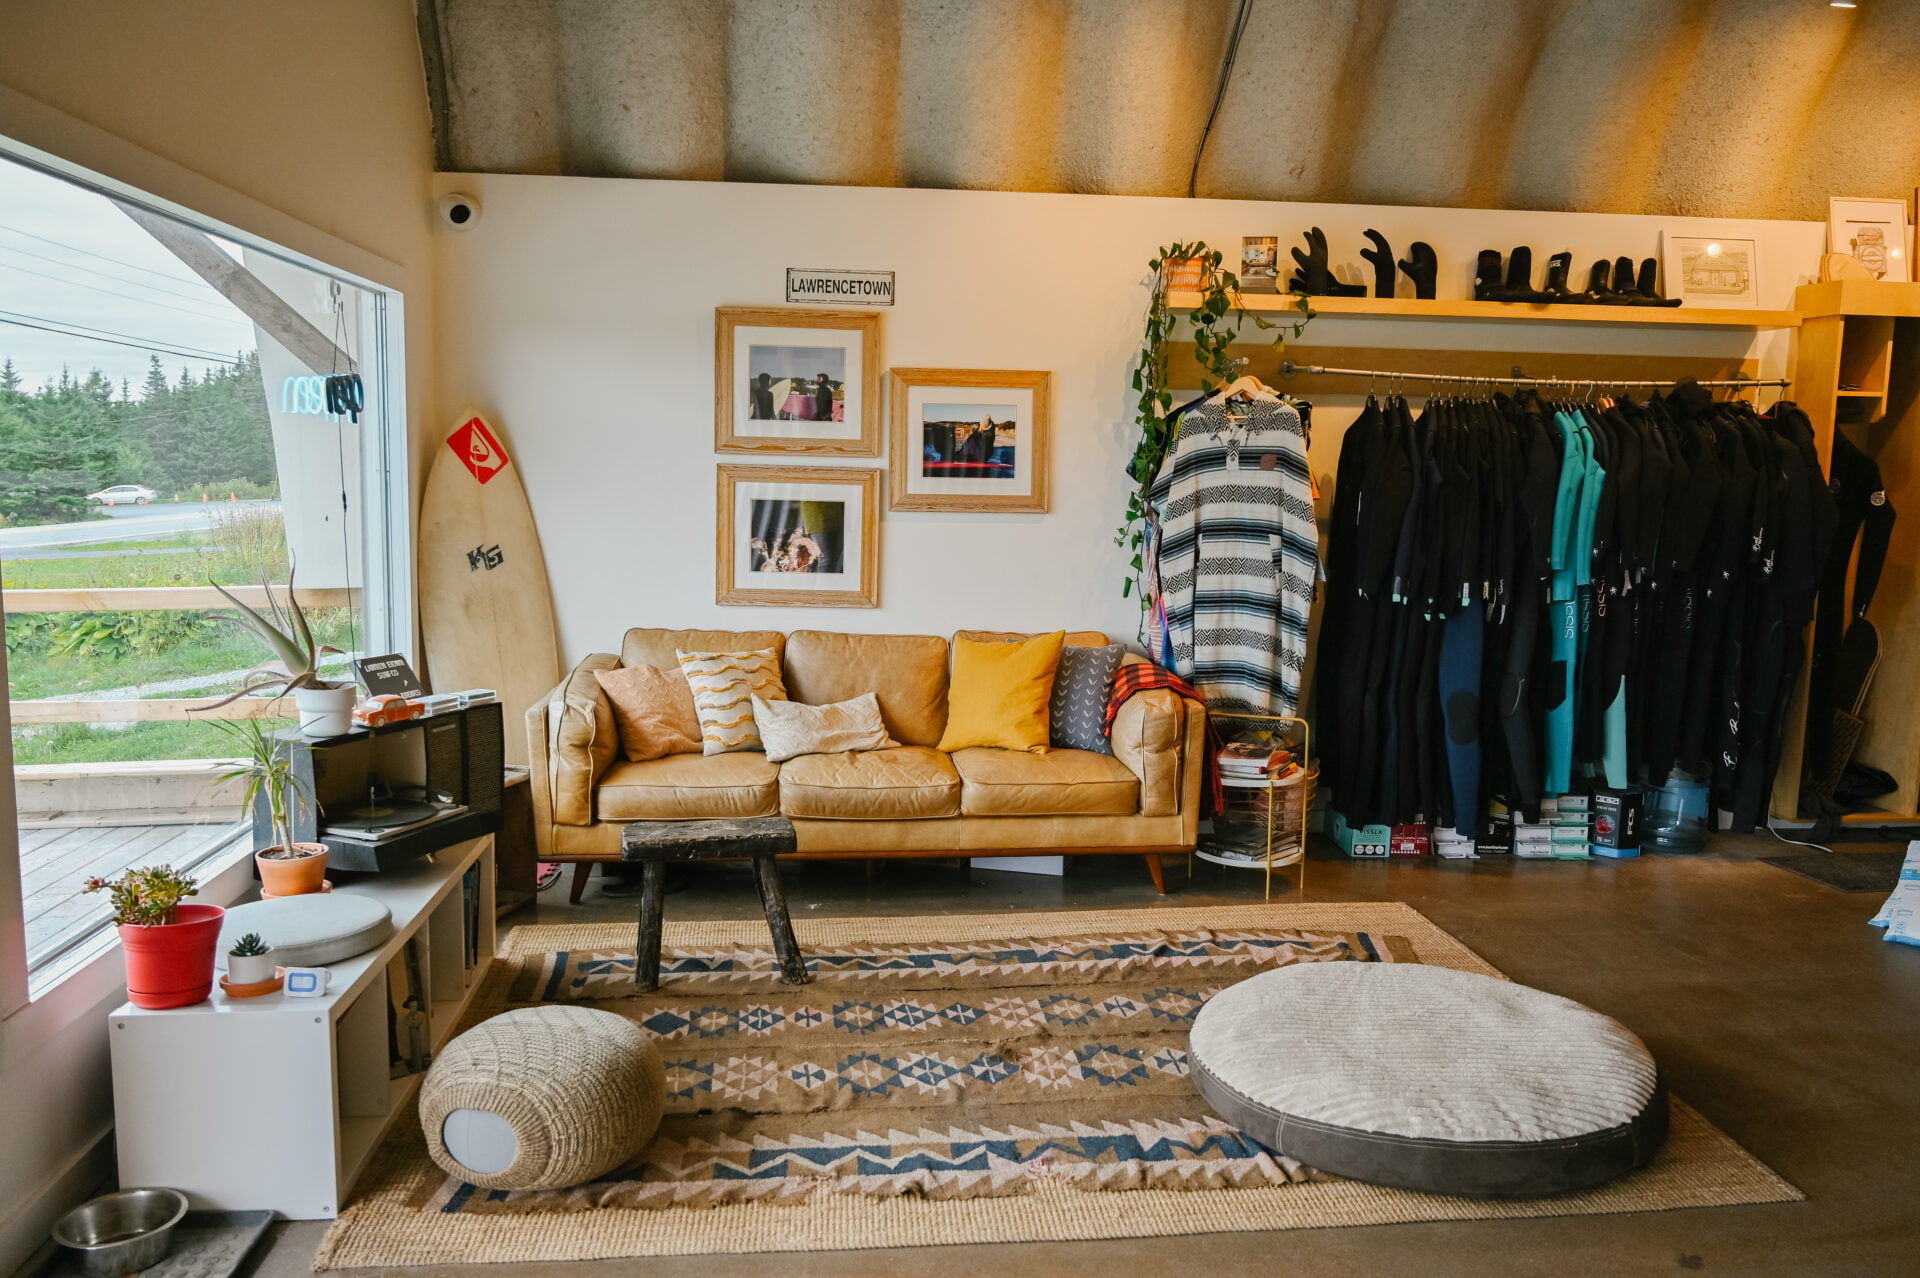 inside view of the sitting space, complete with couch and dog bed, inside the lawrencetown surf shop